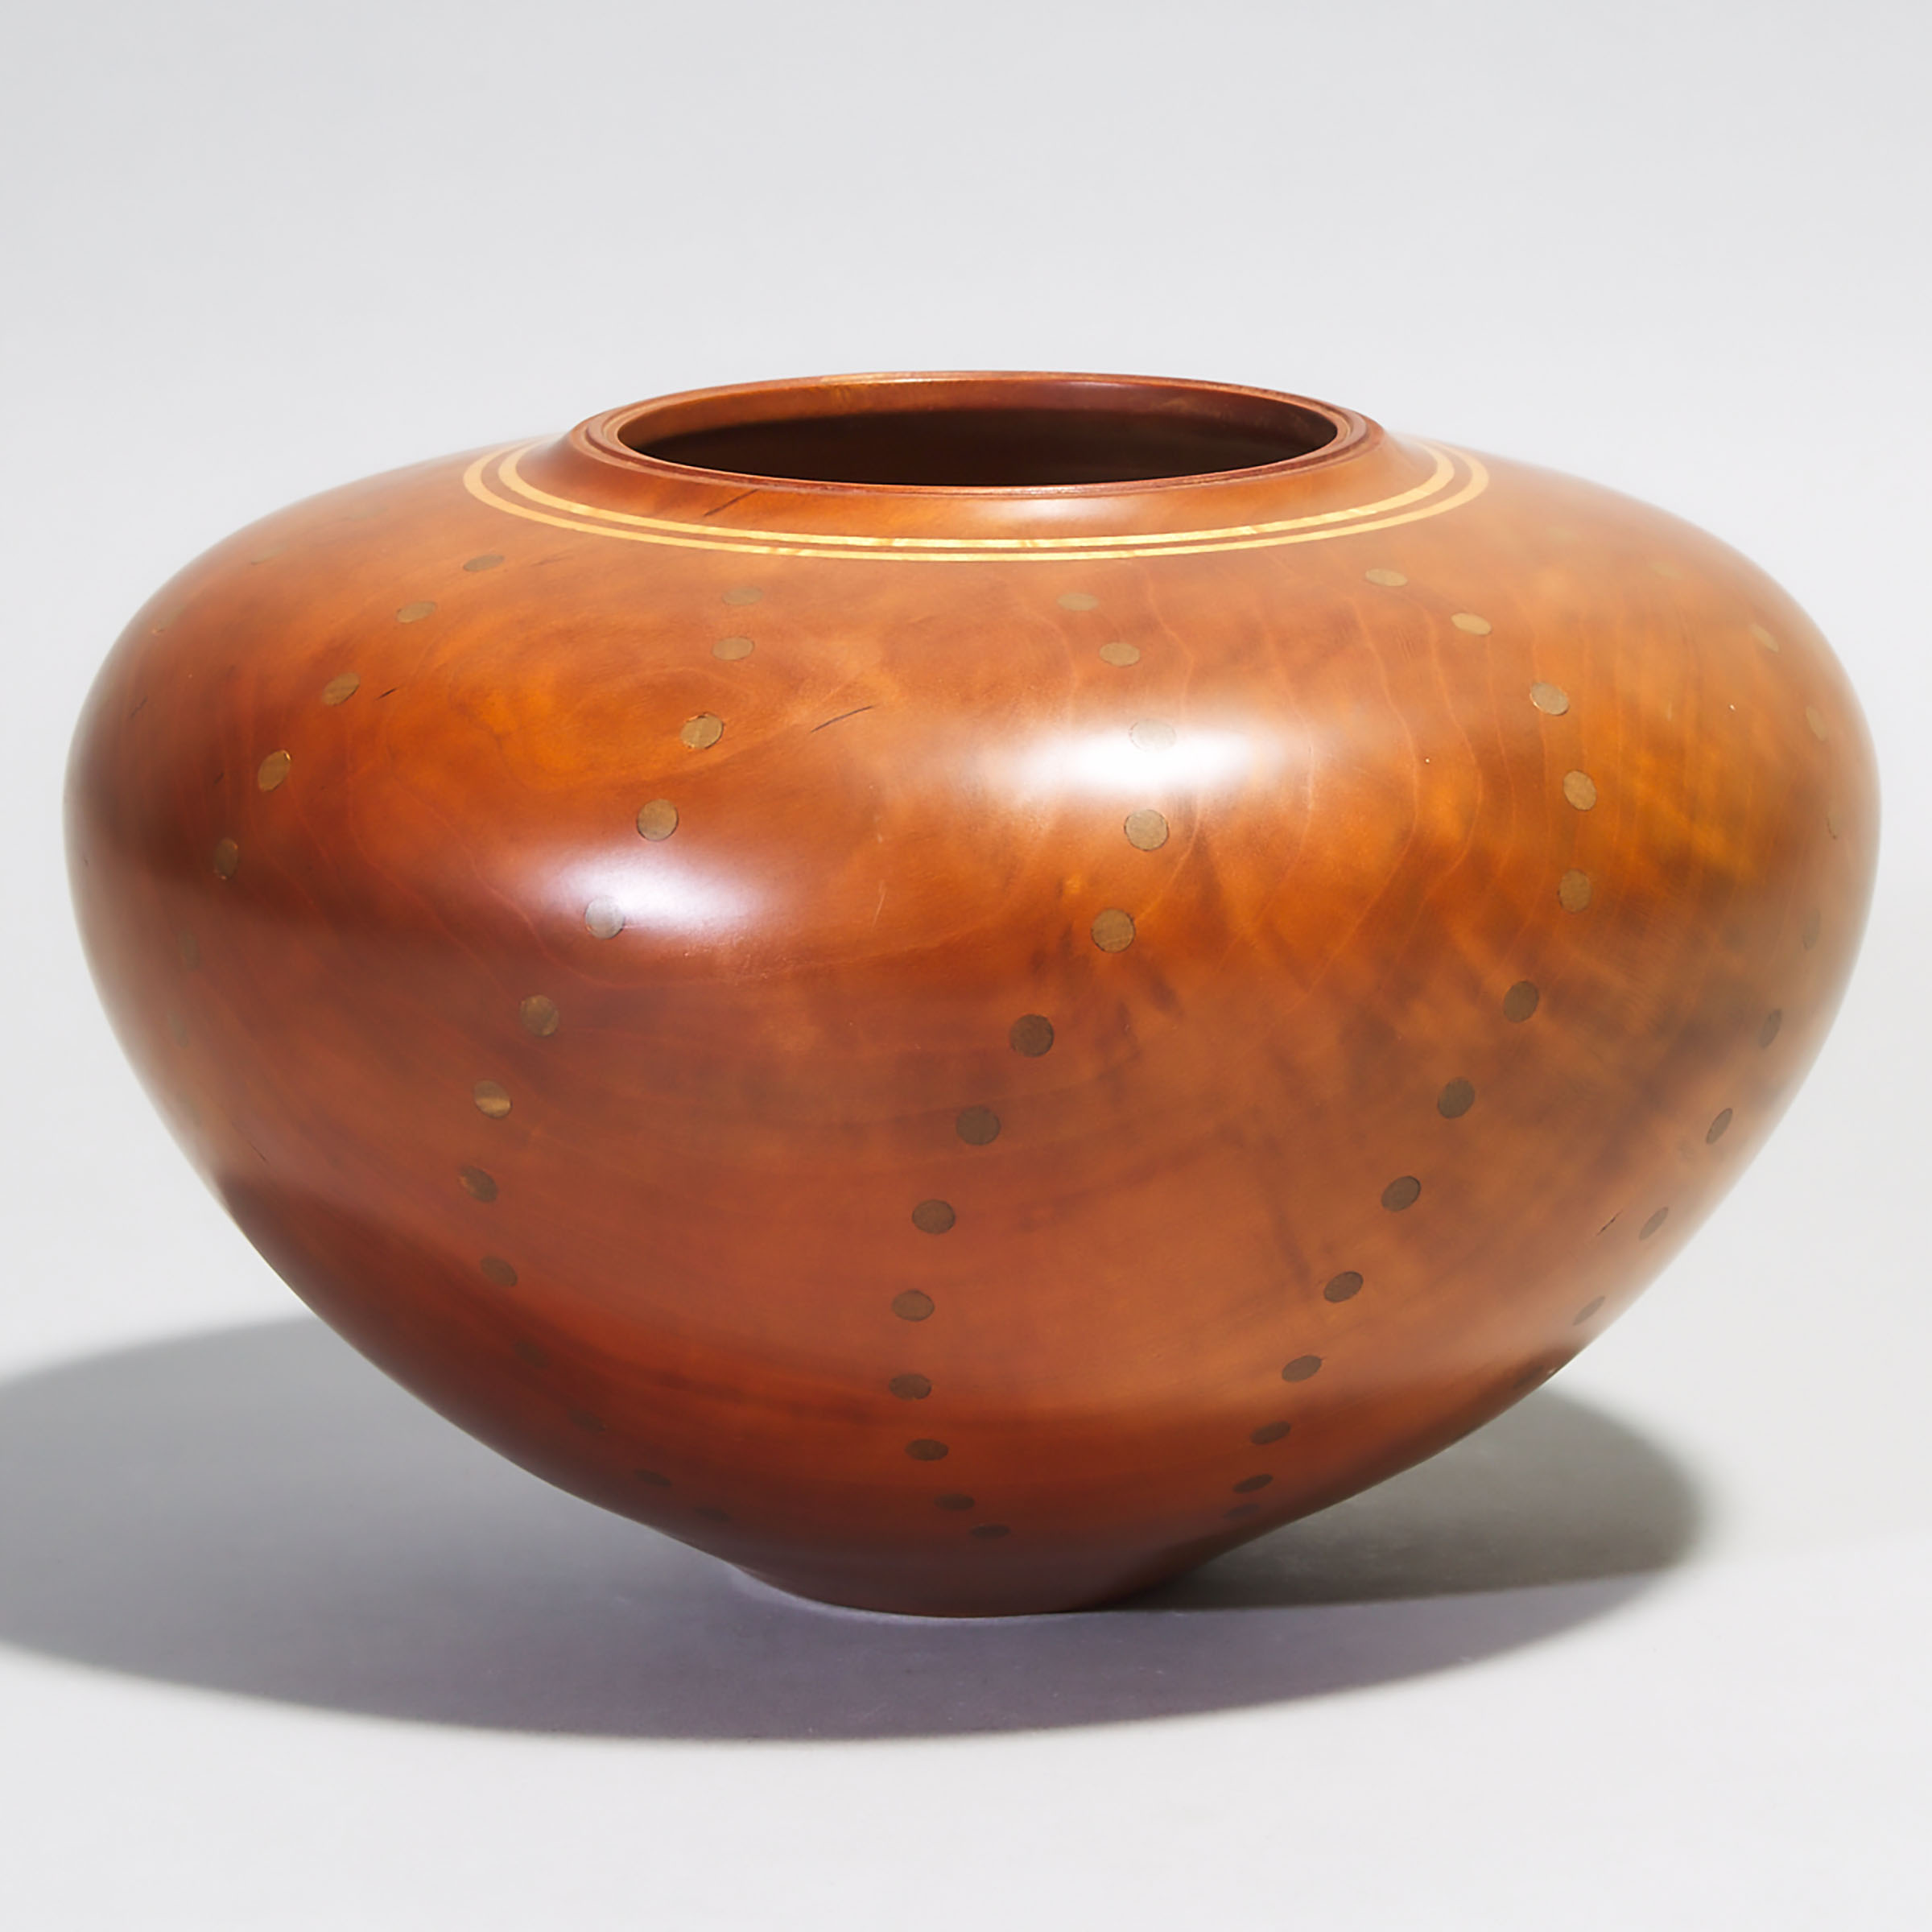 Robert G. Woods (Canadian, fl. late 20th century), Turned and Inlaid Cherry Wood Vase, 1991